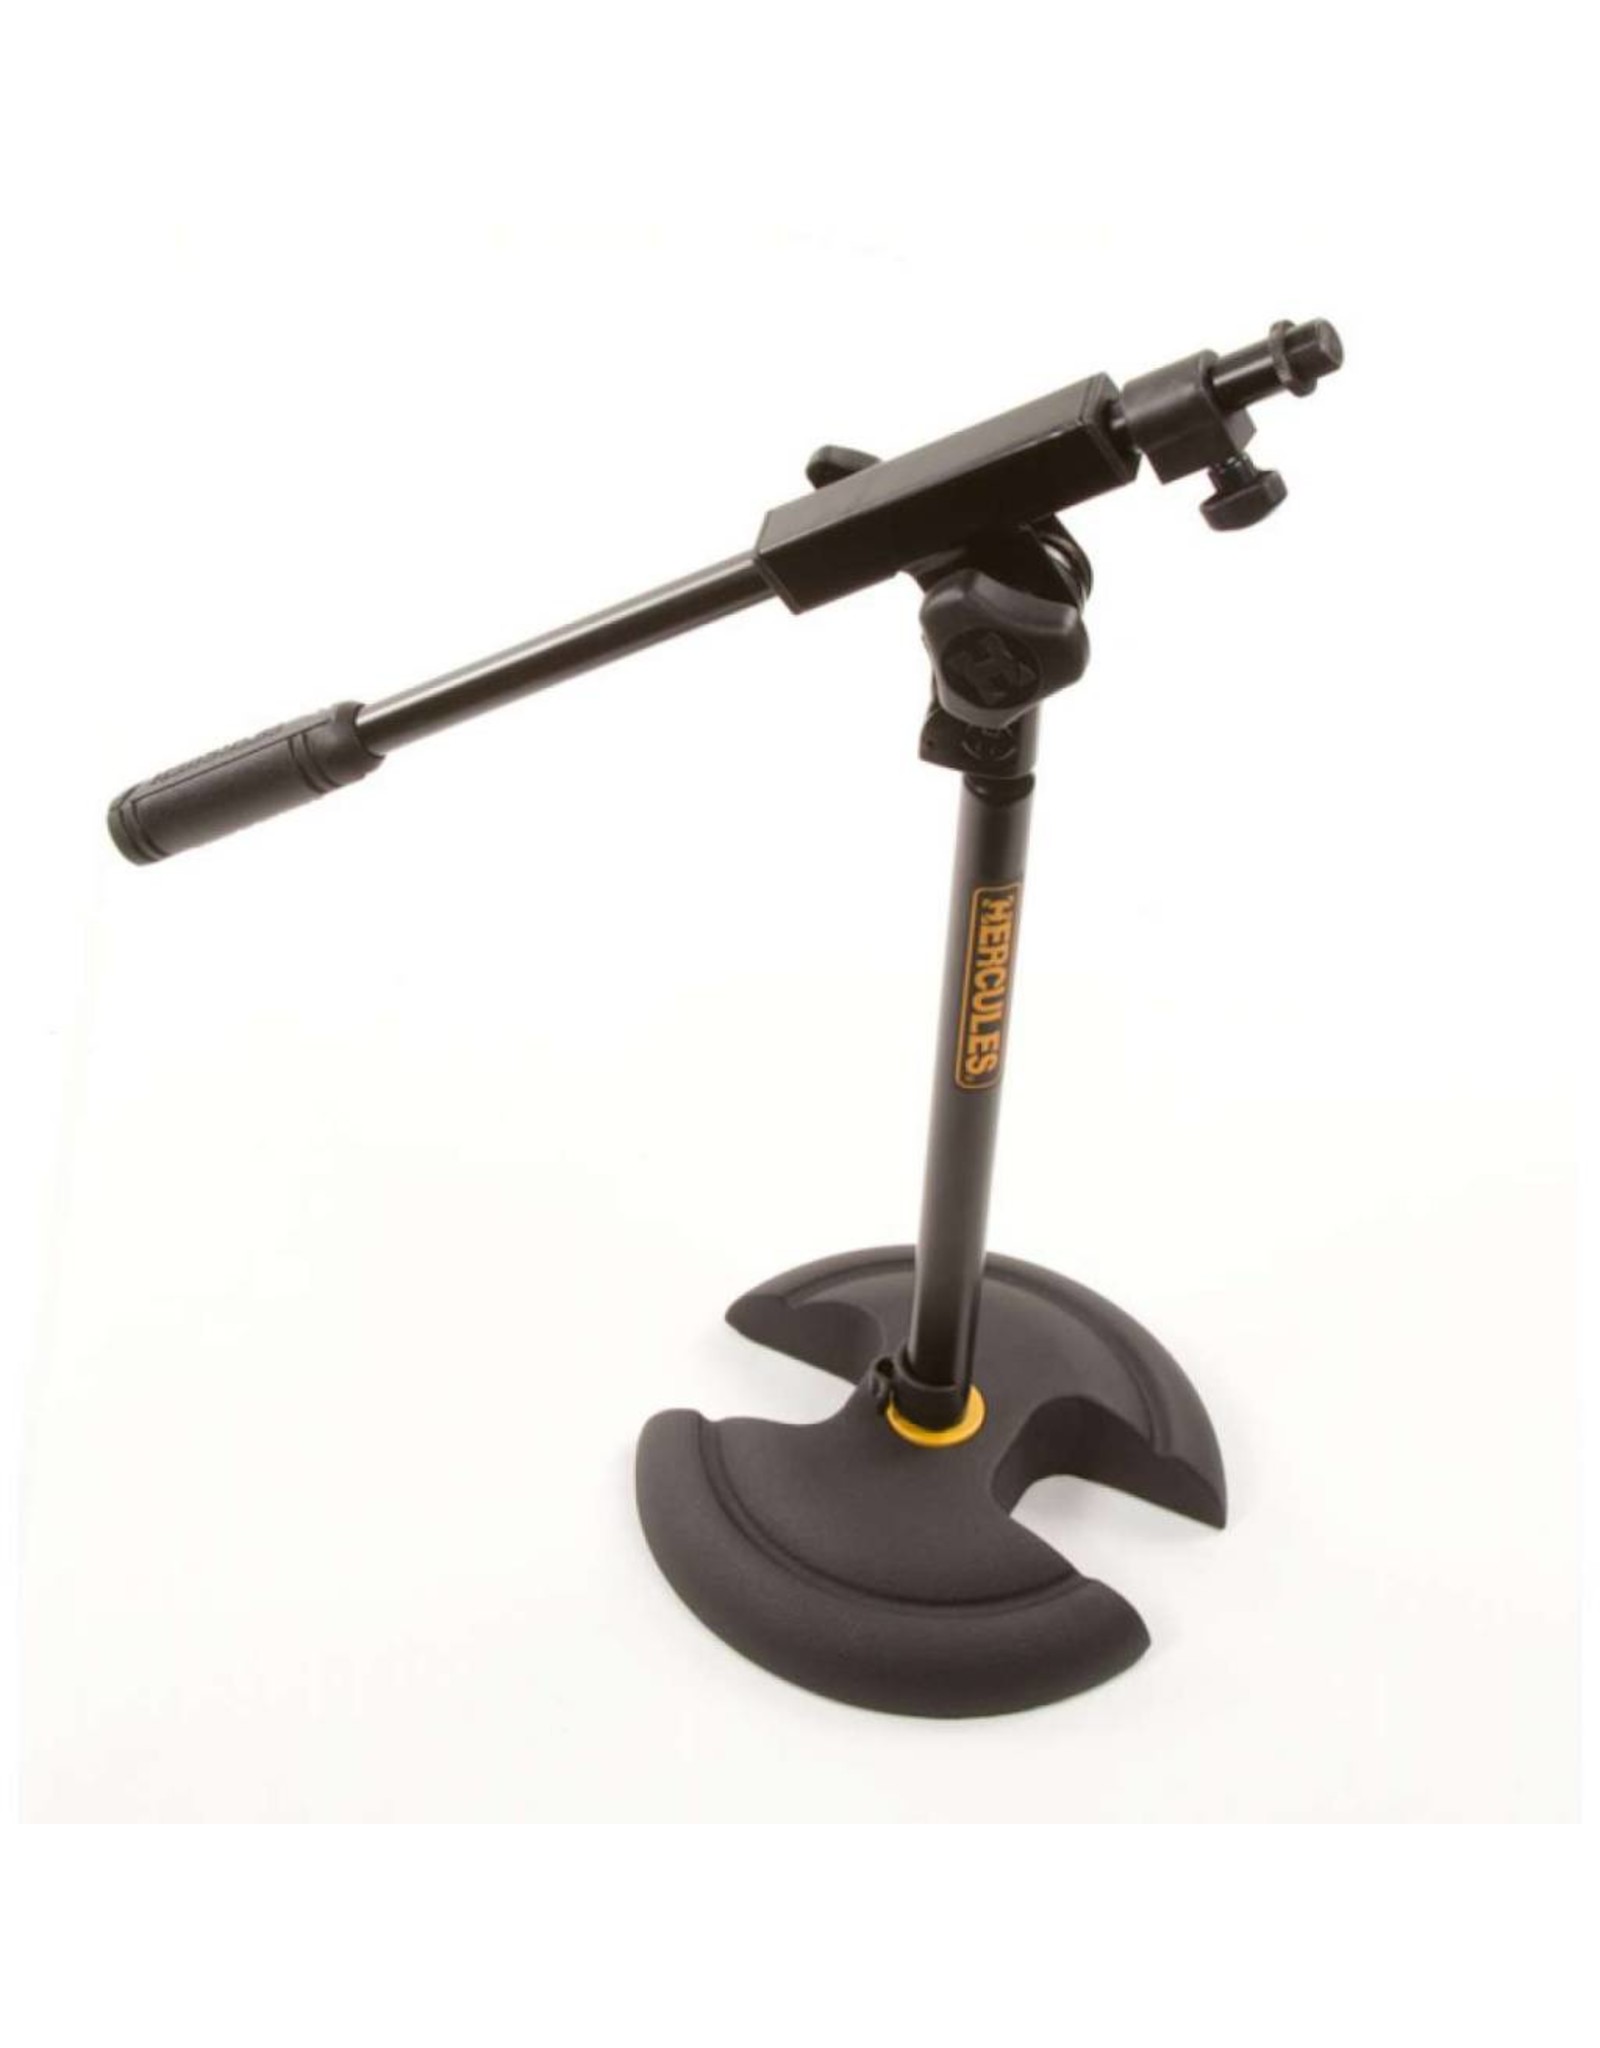 Hercules stands MS-202B  Microphone stand straight